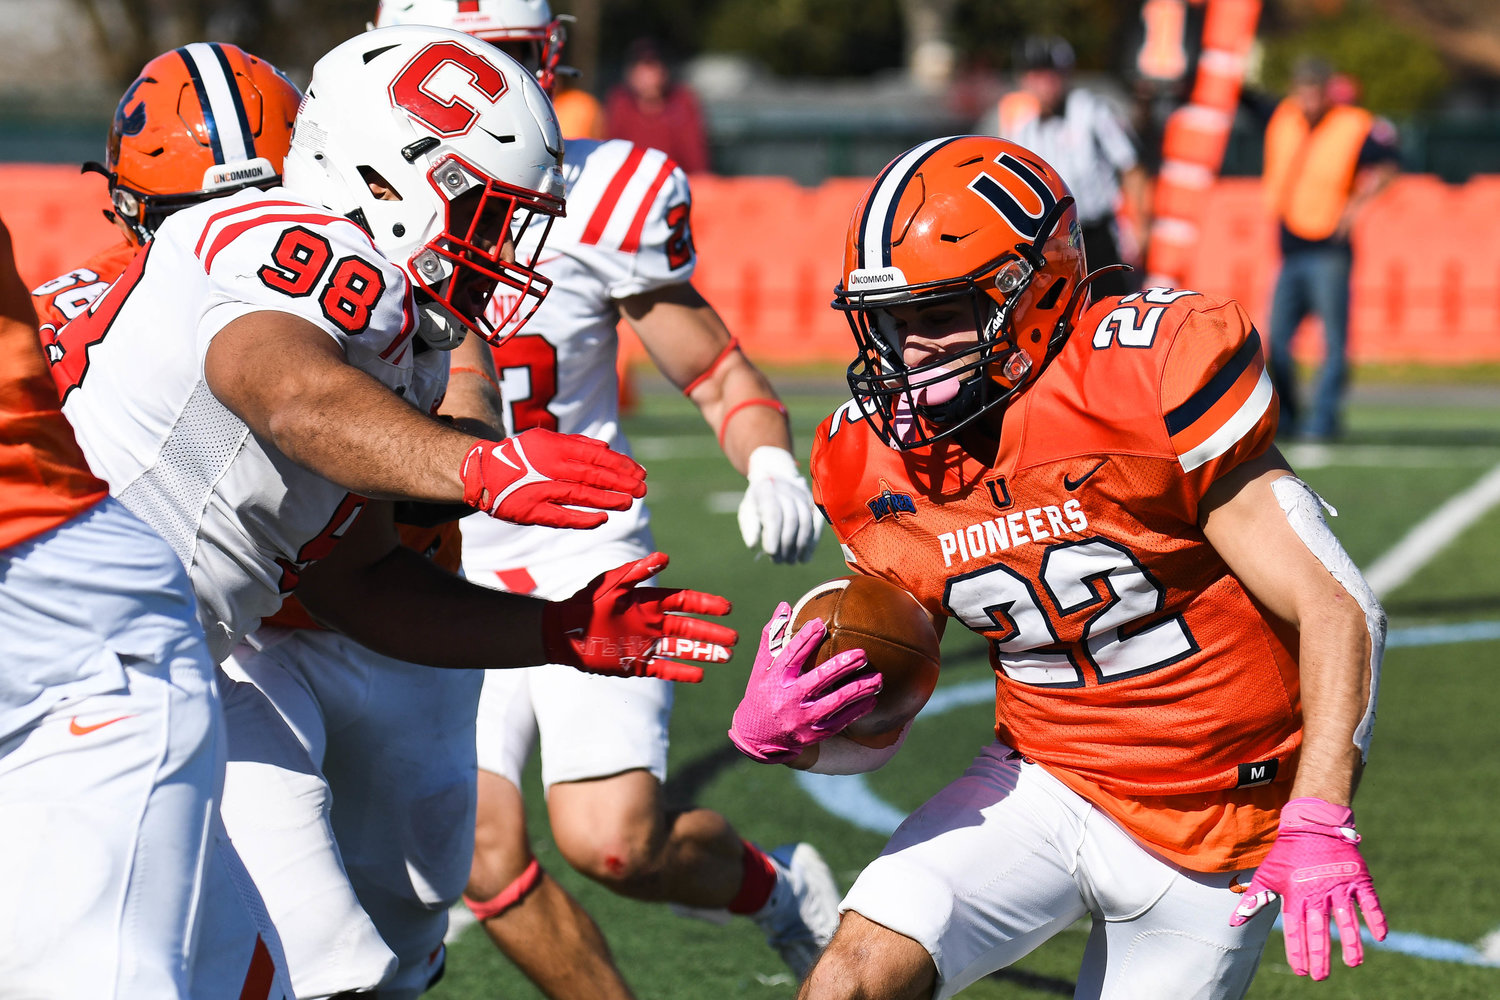 Nate Palmer (22) earned numerous honors after a record-breaking season with the Utica University football team. The honors include being named to the All-America team.